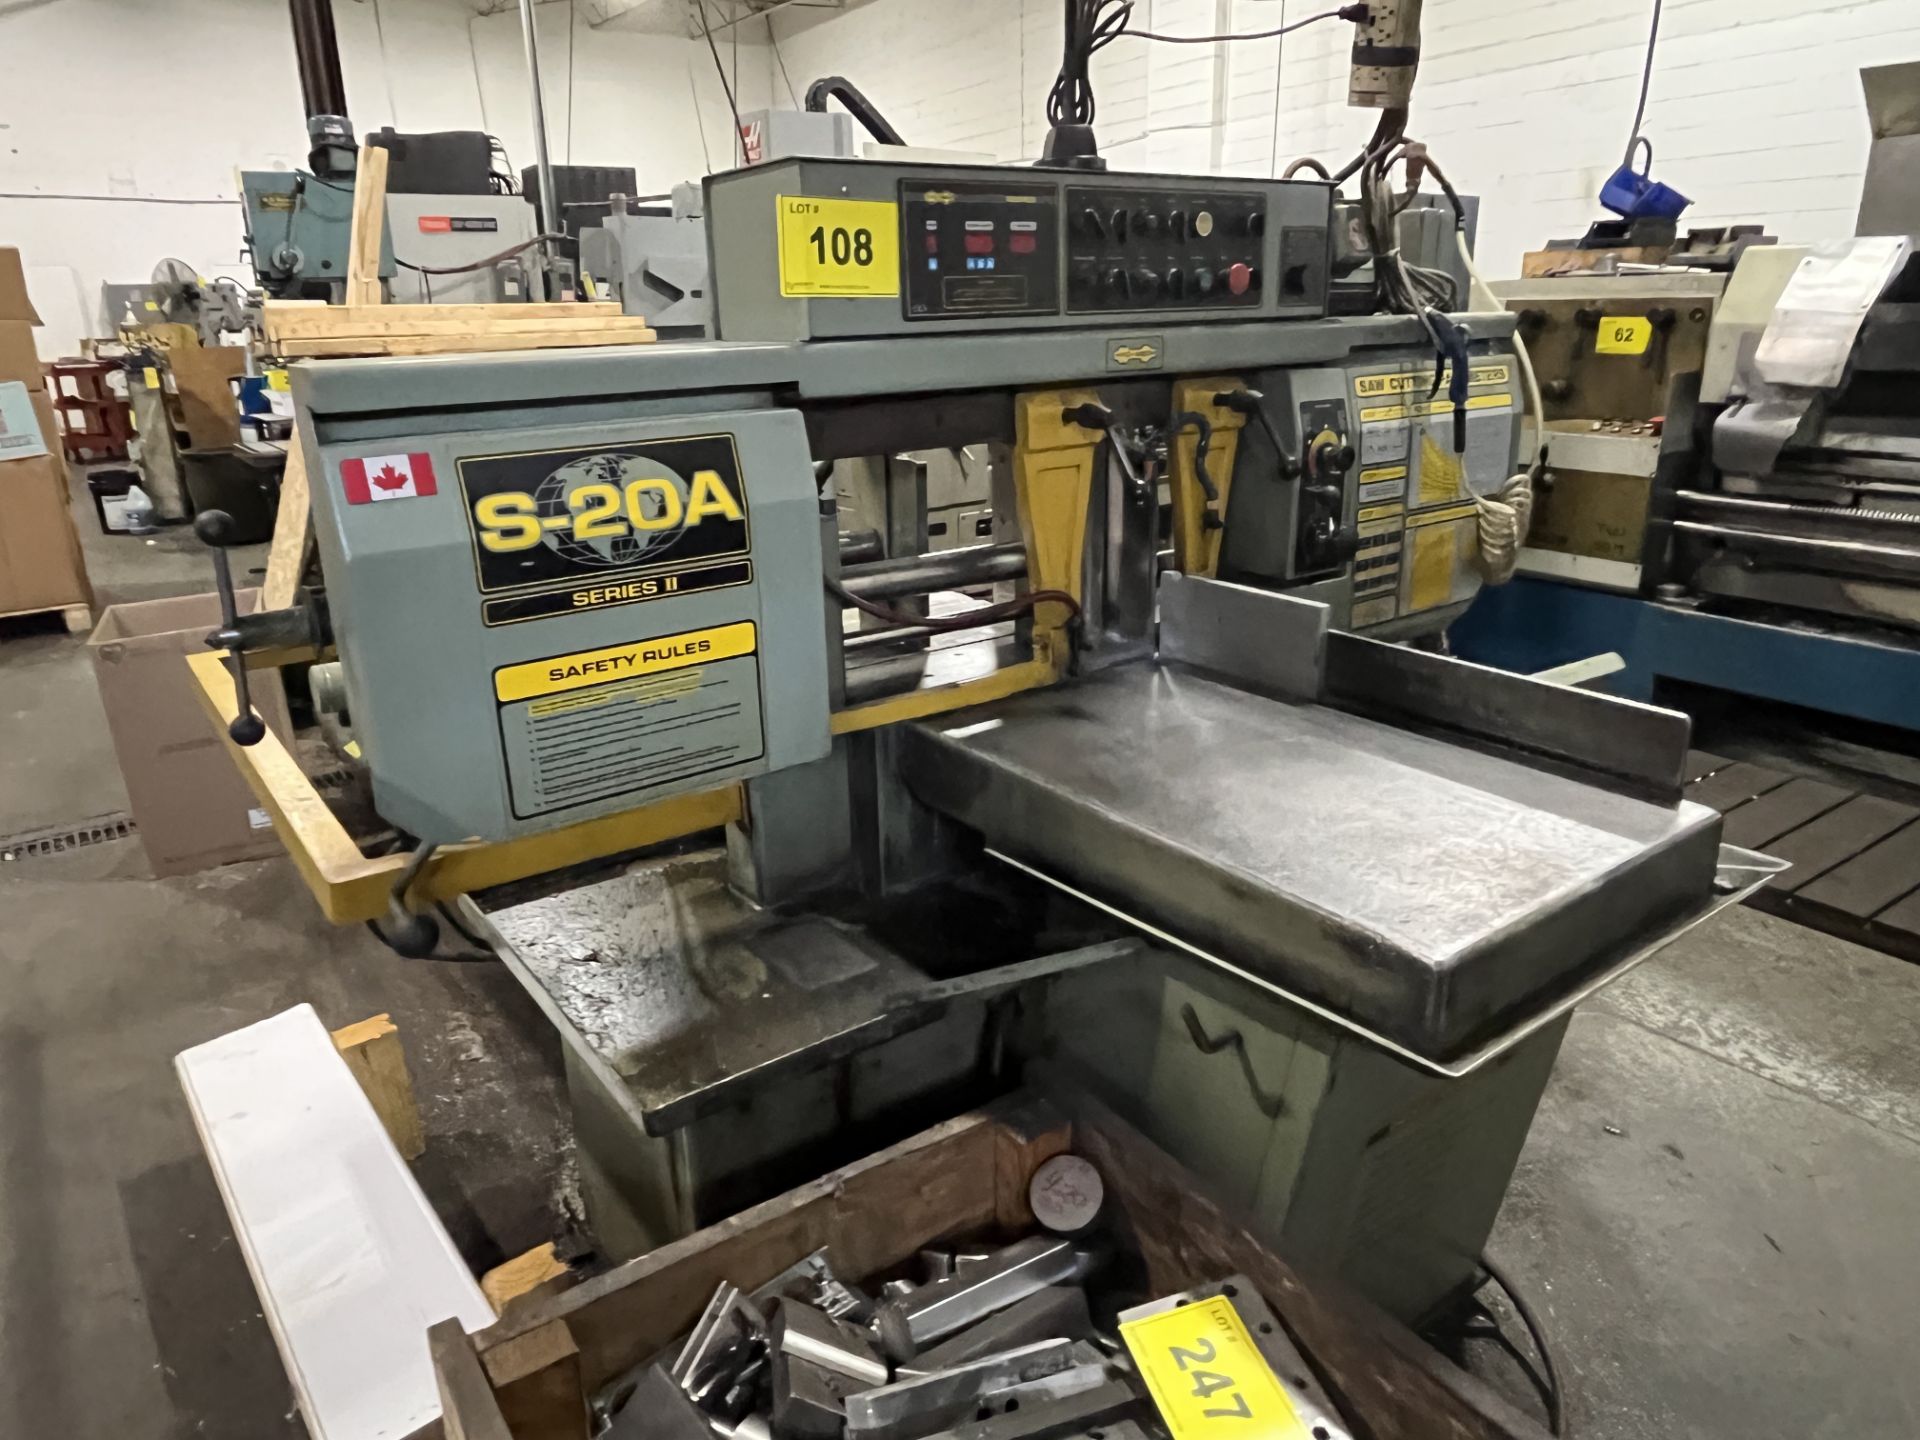 HYD-MECH S-20A SERIES II AUTOMATIC HORIZONTAL BANDSAW, S/N 80298380 W/ CONVEYOR (RIGGING FEE $825) - Image 11 of 13